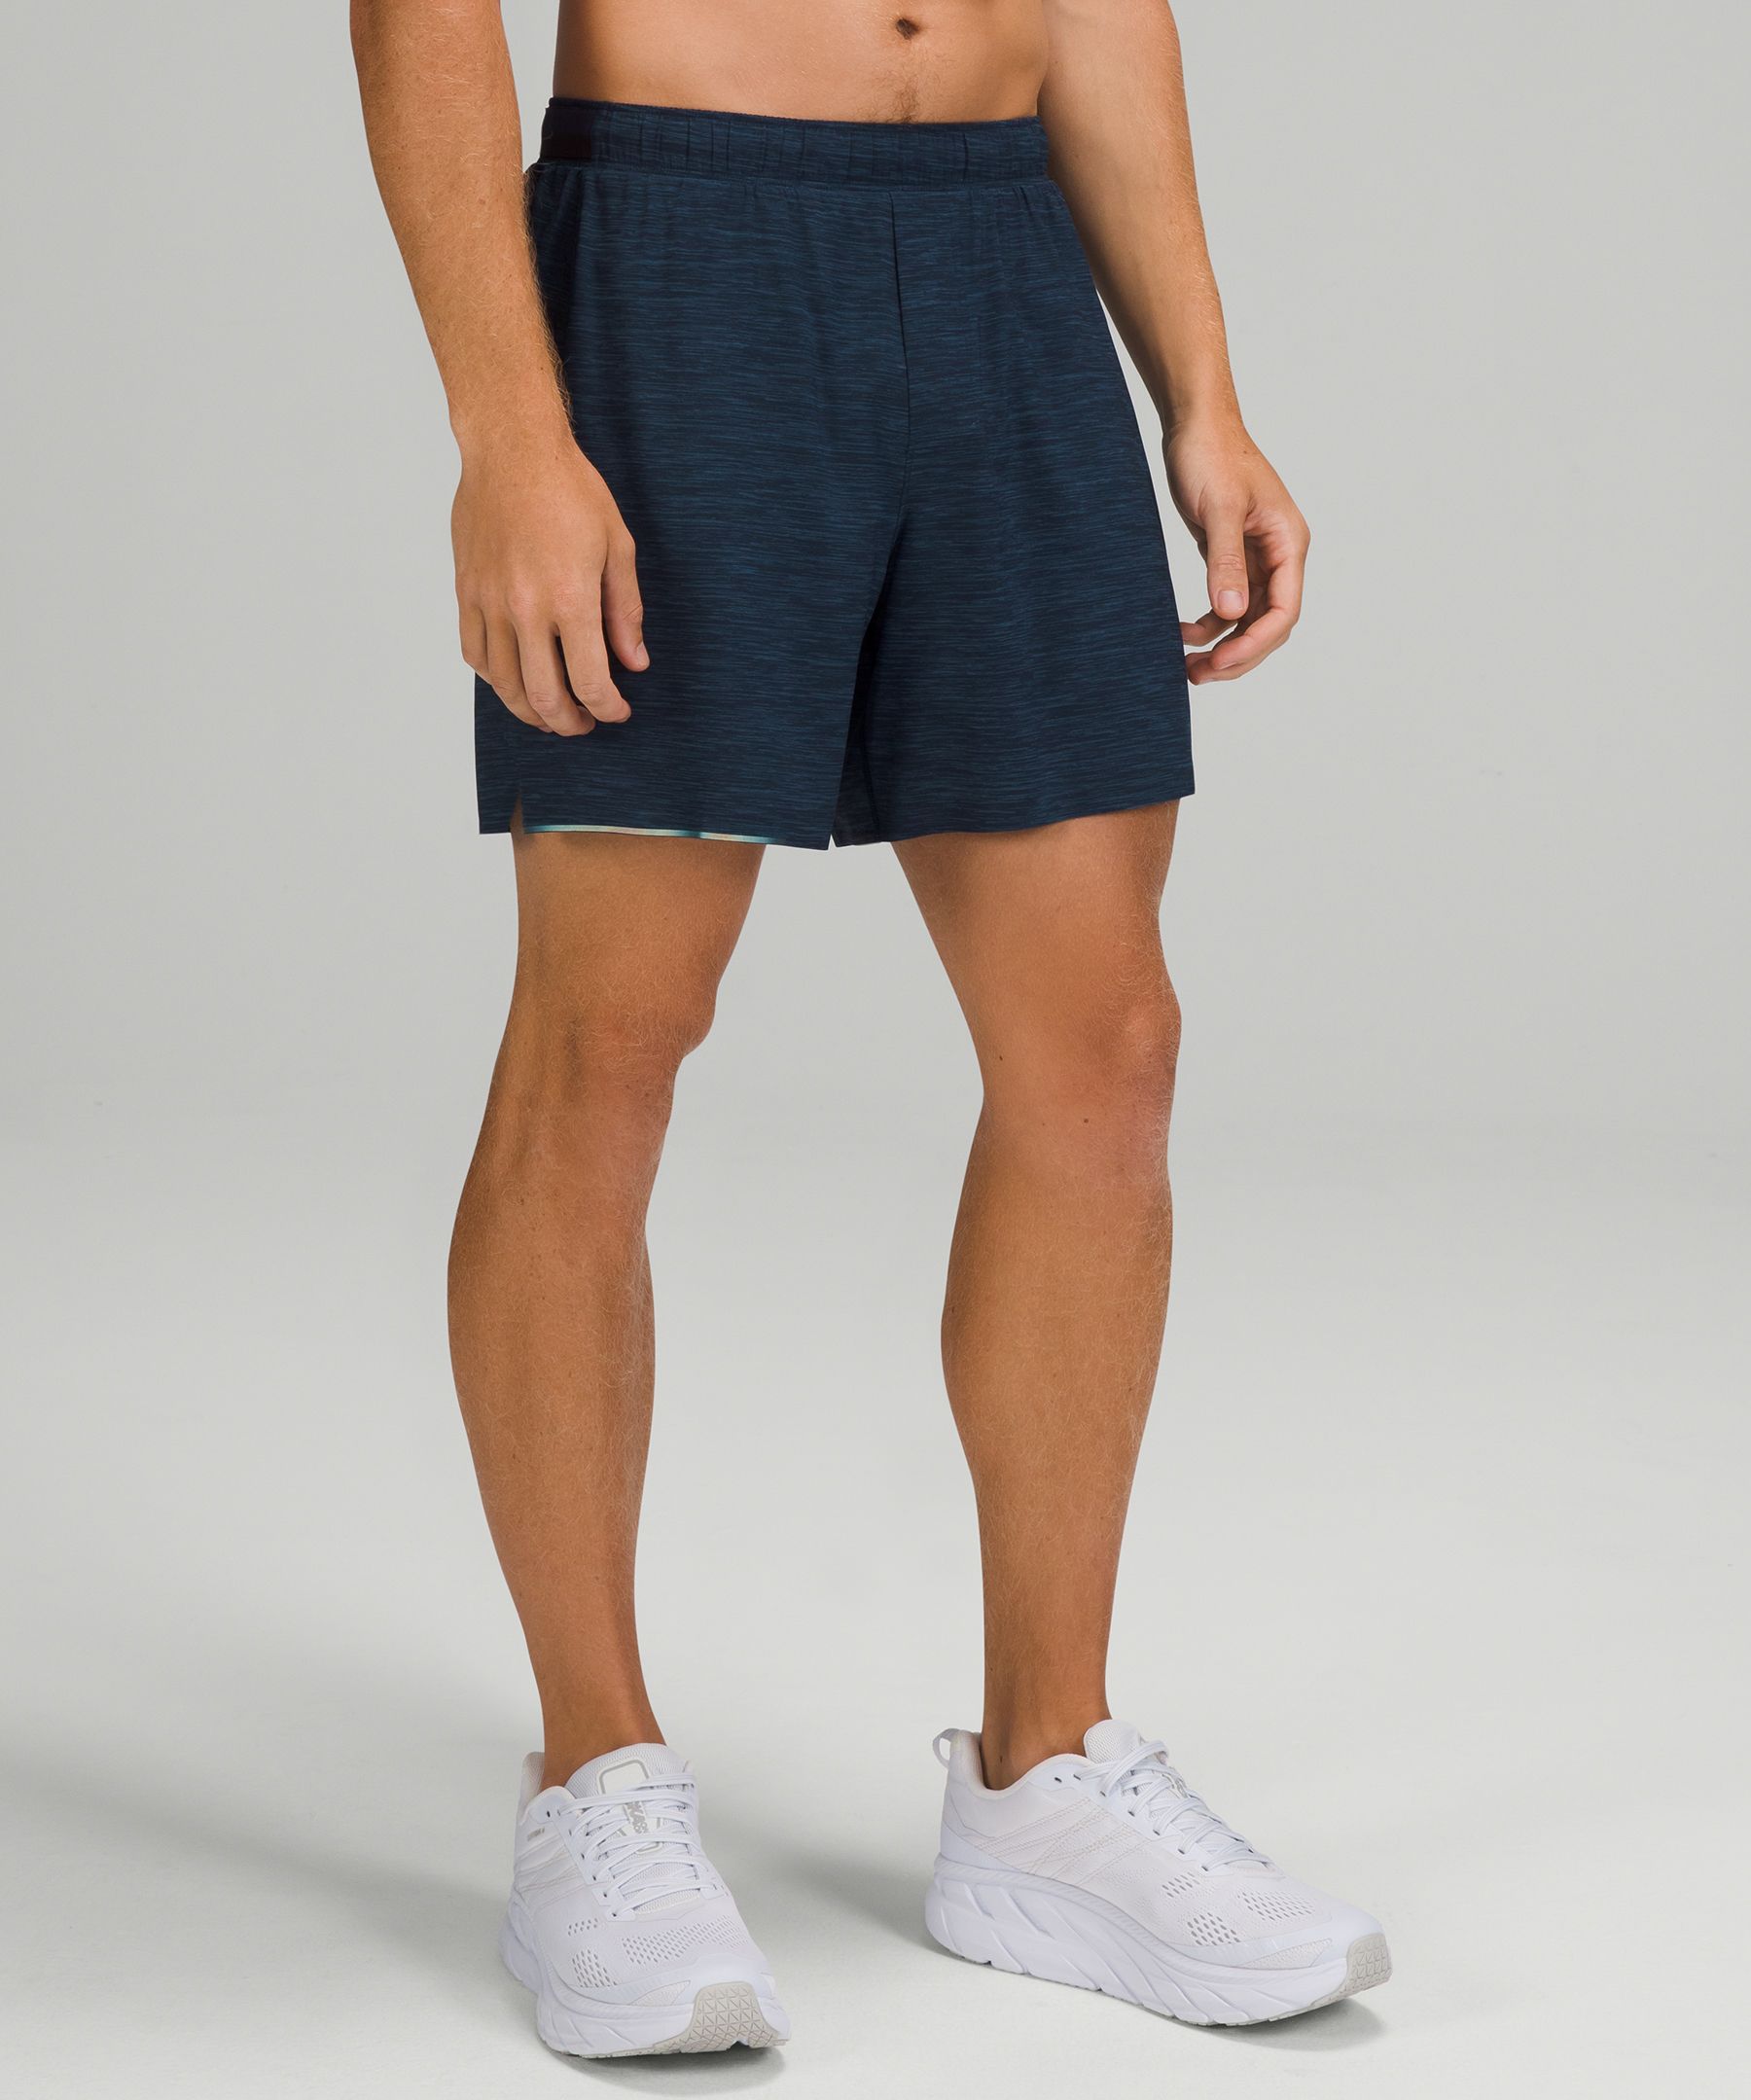 Lululemon Surge Lined Shorts 6" In Heather Allover Iron Blue True Navy